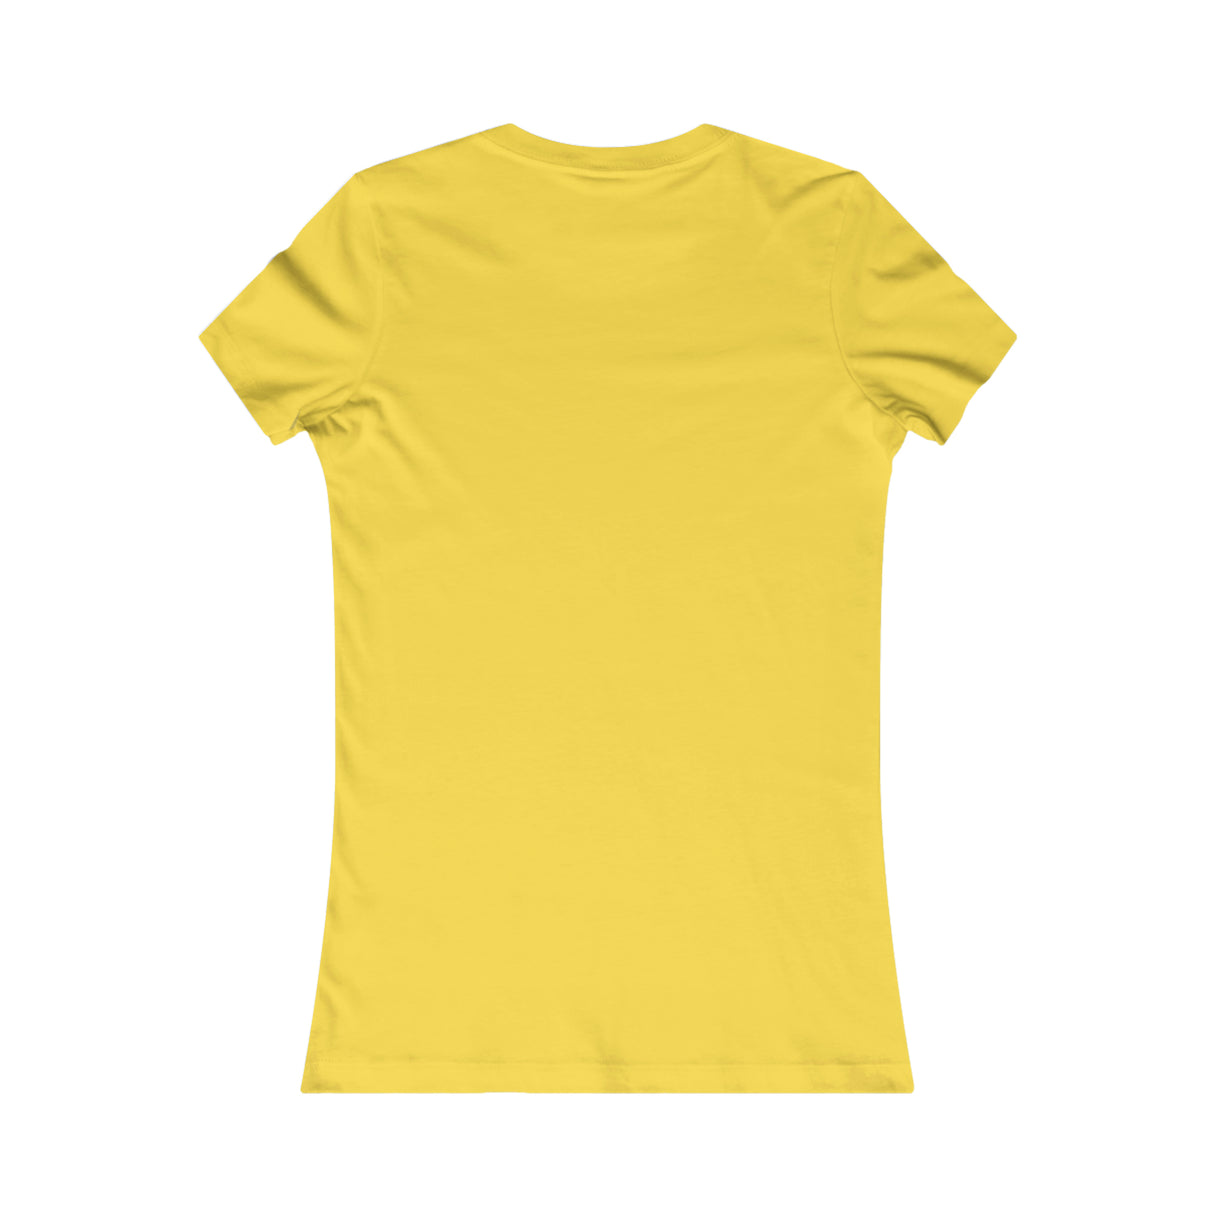 Eagle We Do Recover Women's DTG Tee